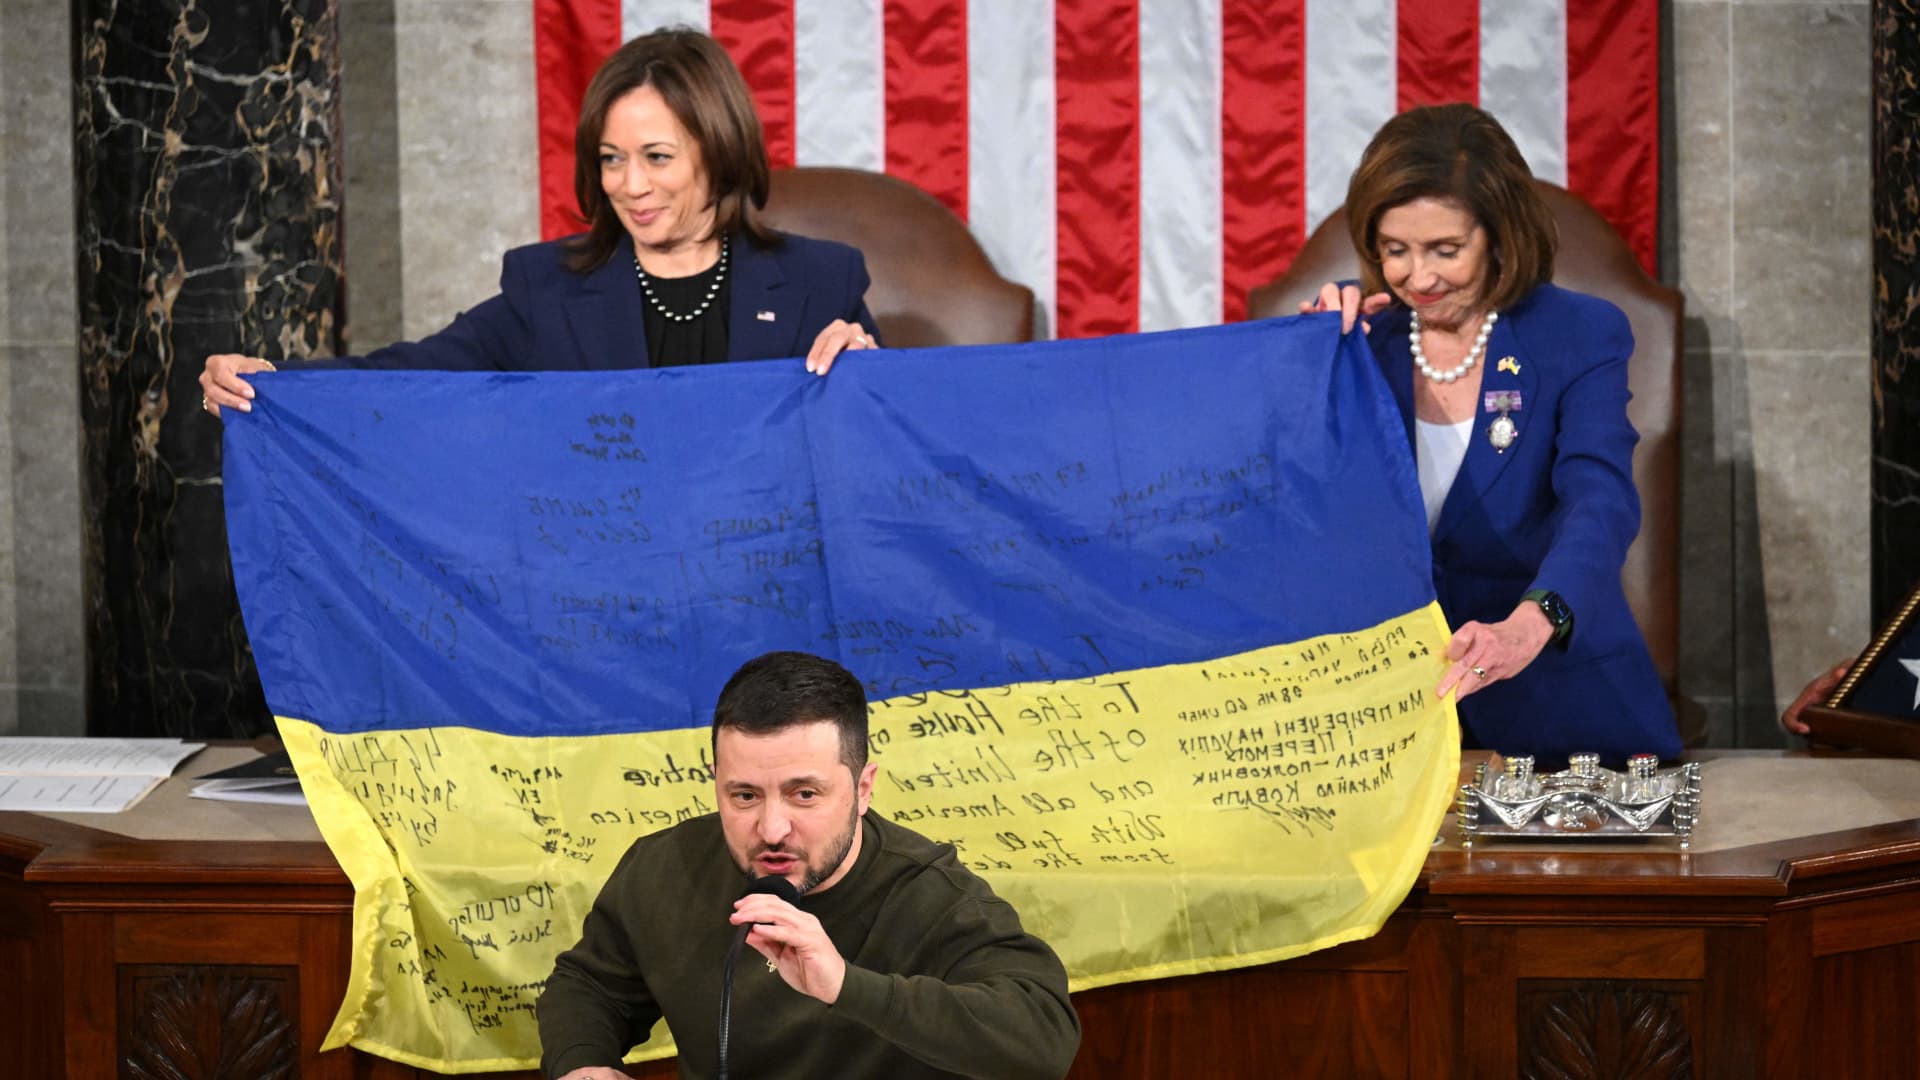 Ukraine's President Volodymyr Zelenskyy visited Washington during which the Biden administration announced another $1.85 billion in military aid for Ukraine.